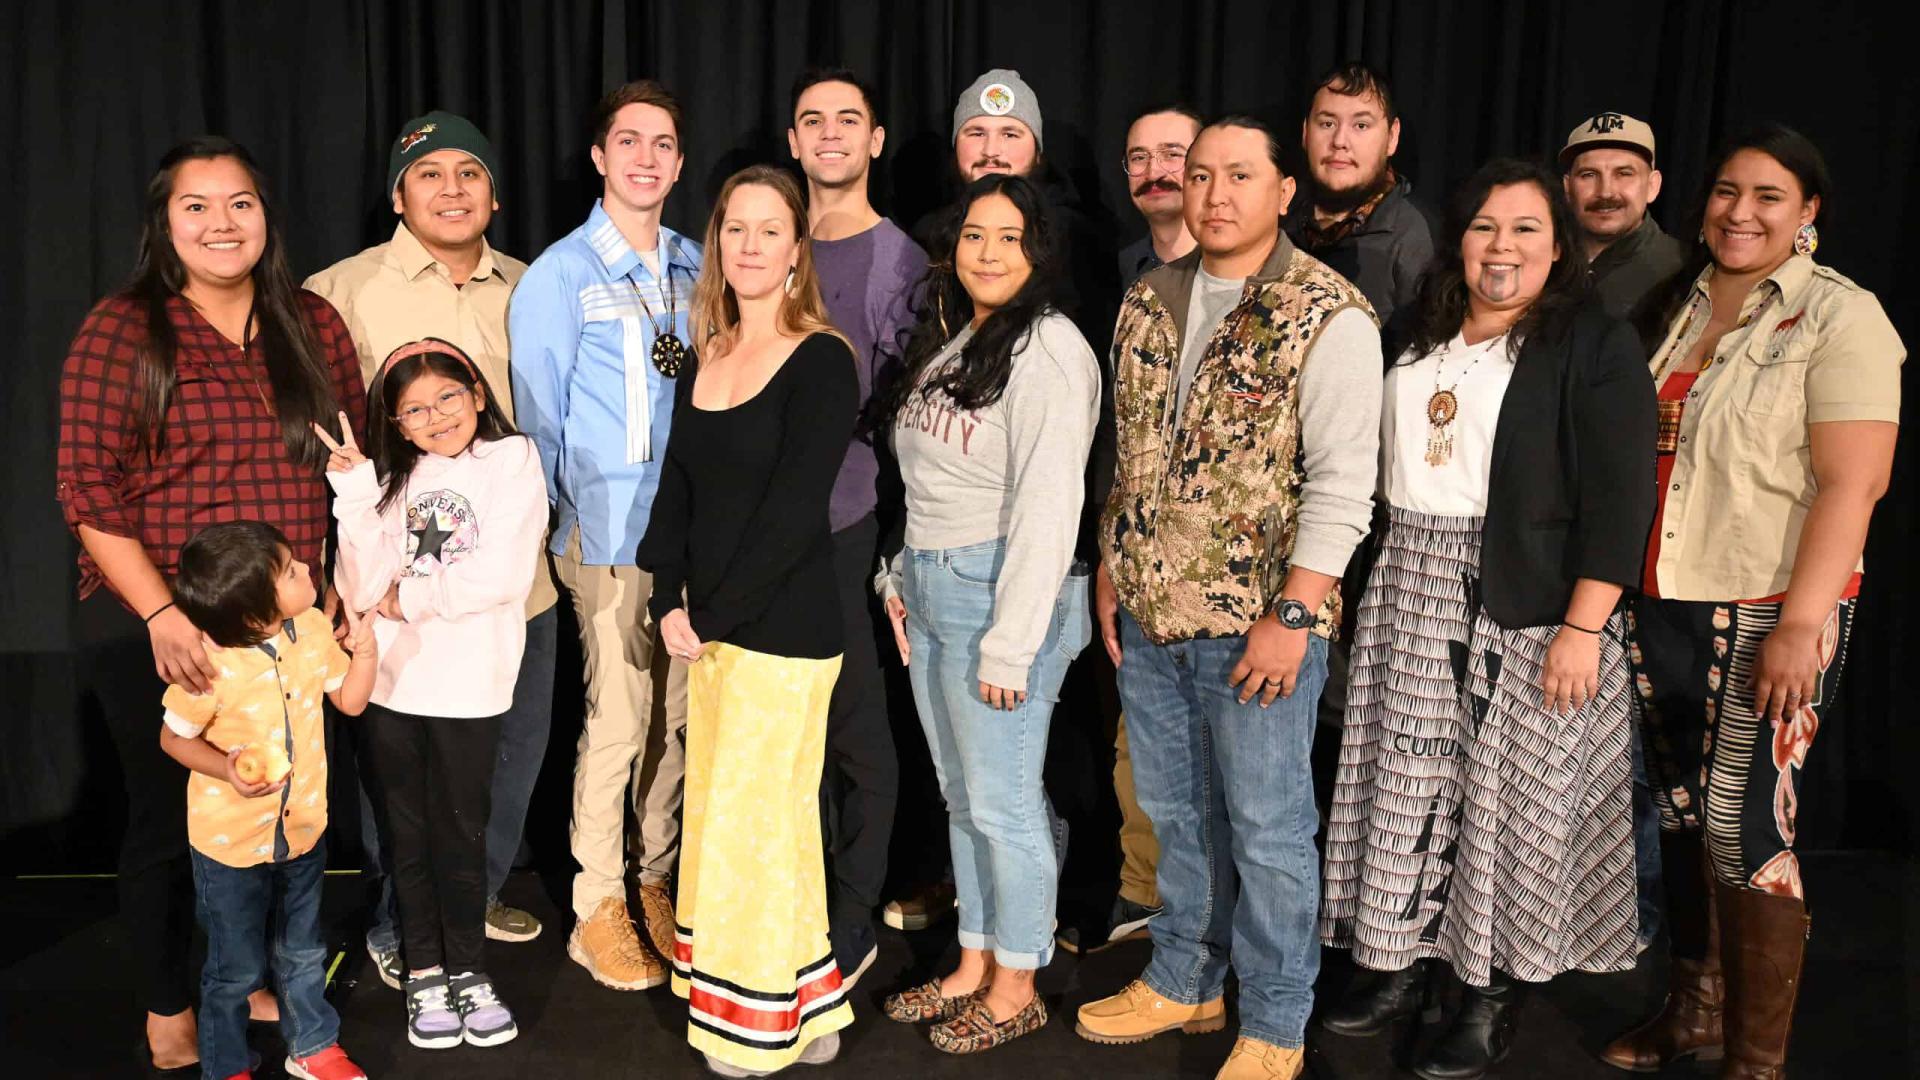 A group of Native American Wildlife Society Conference attendees stands together smiling.